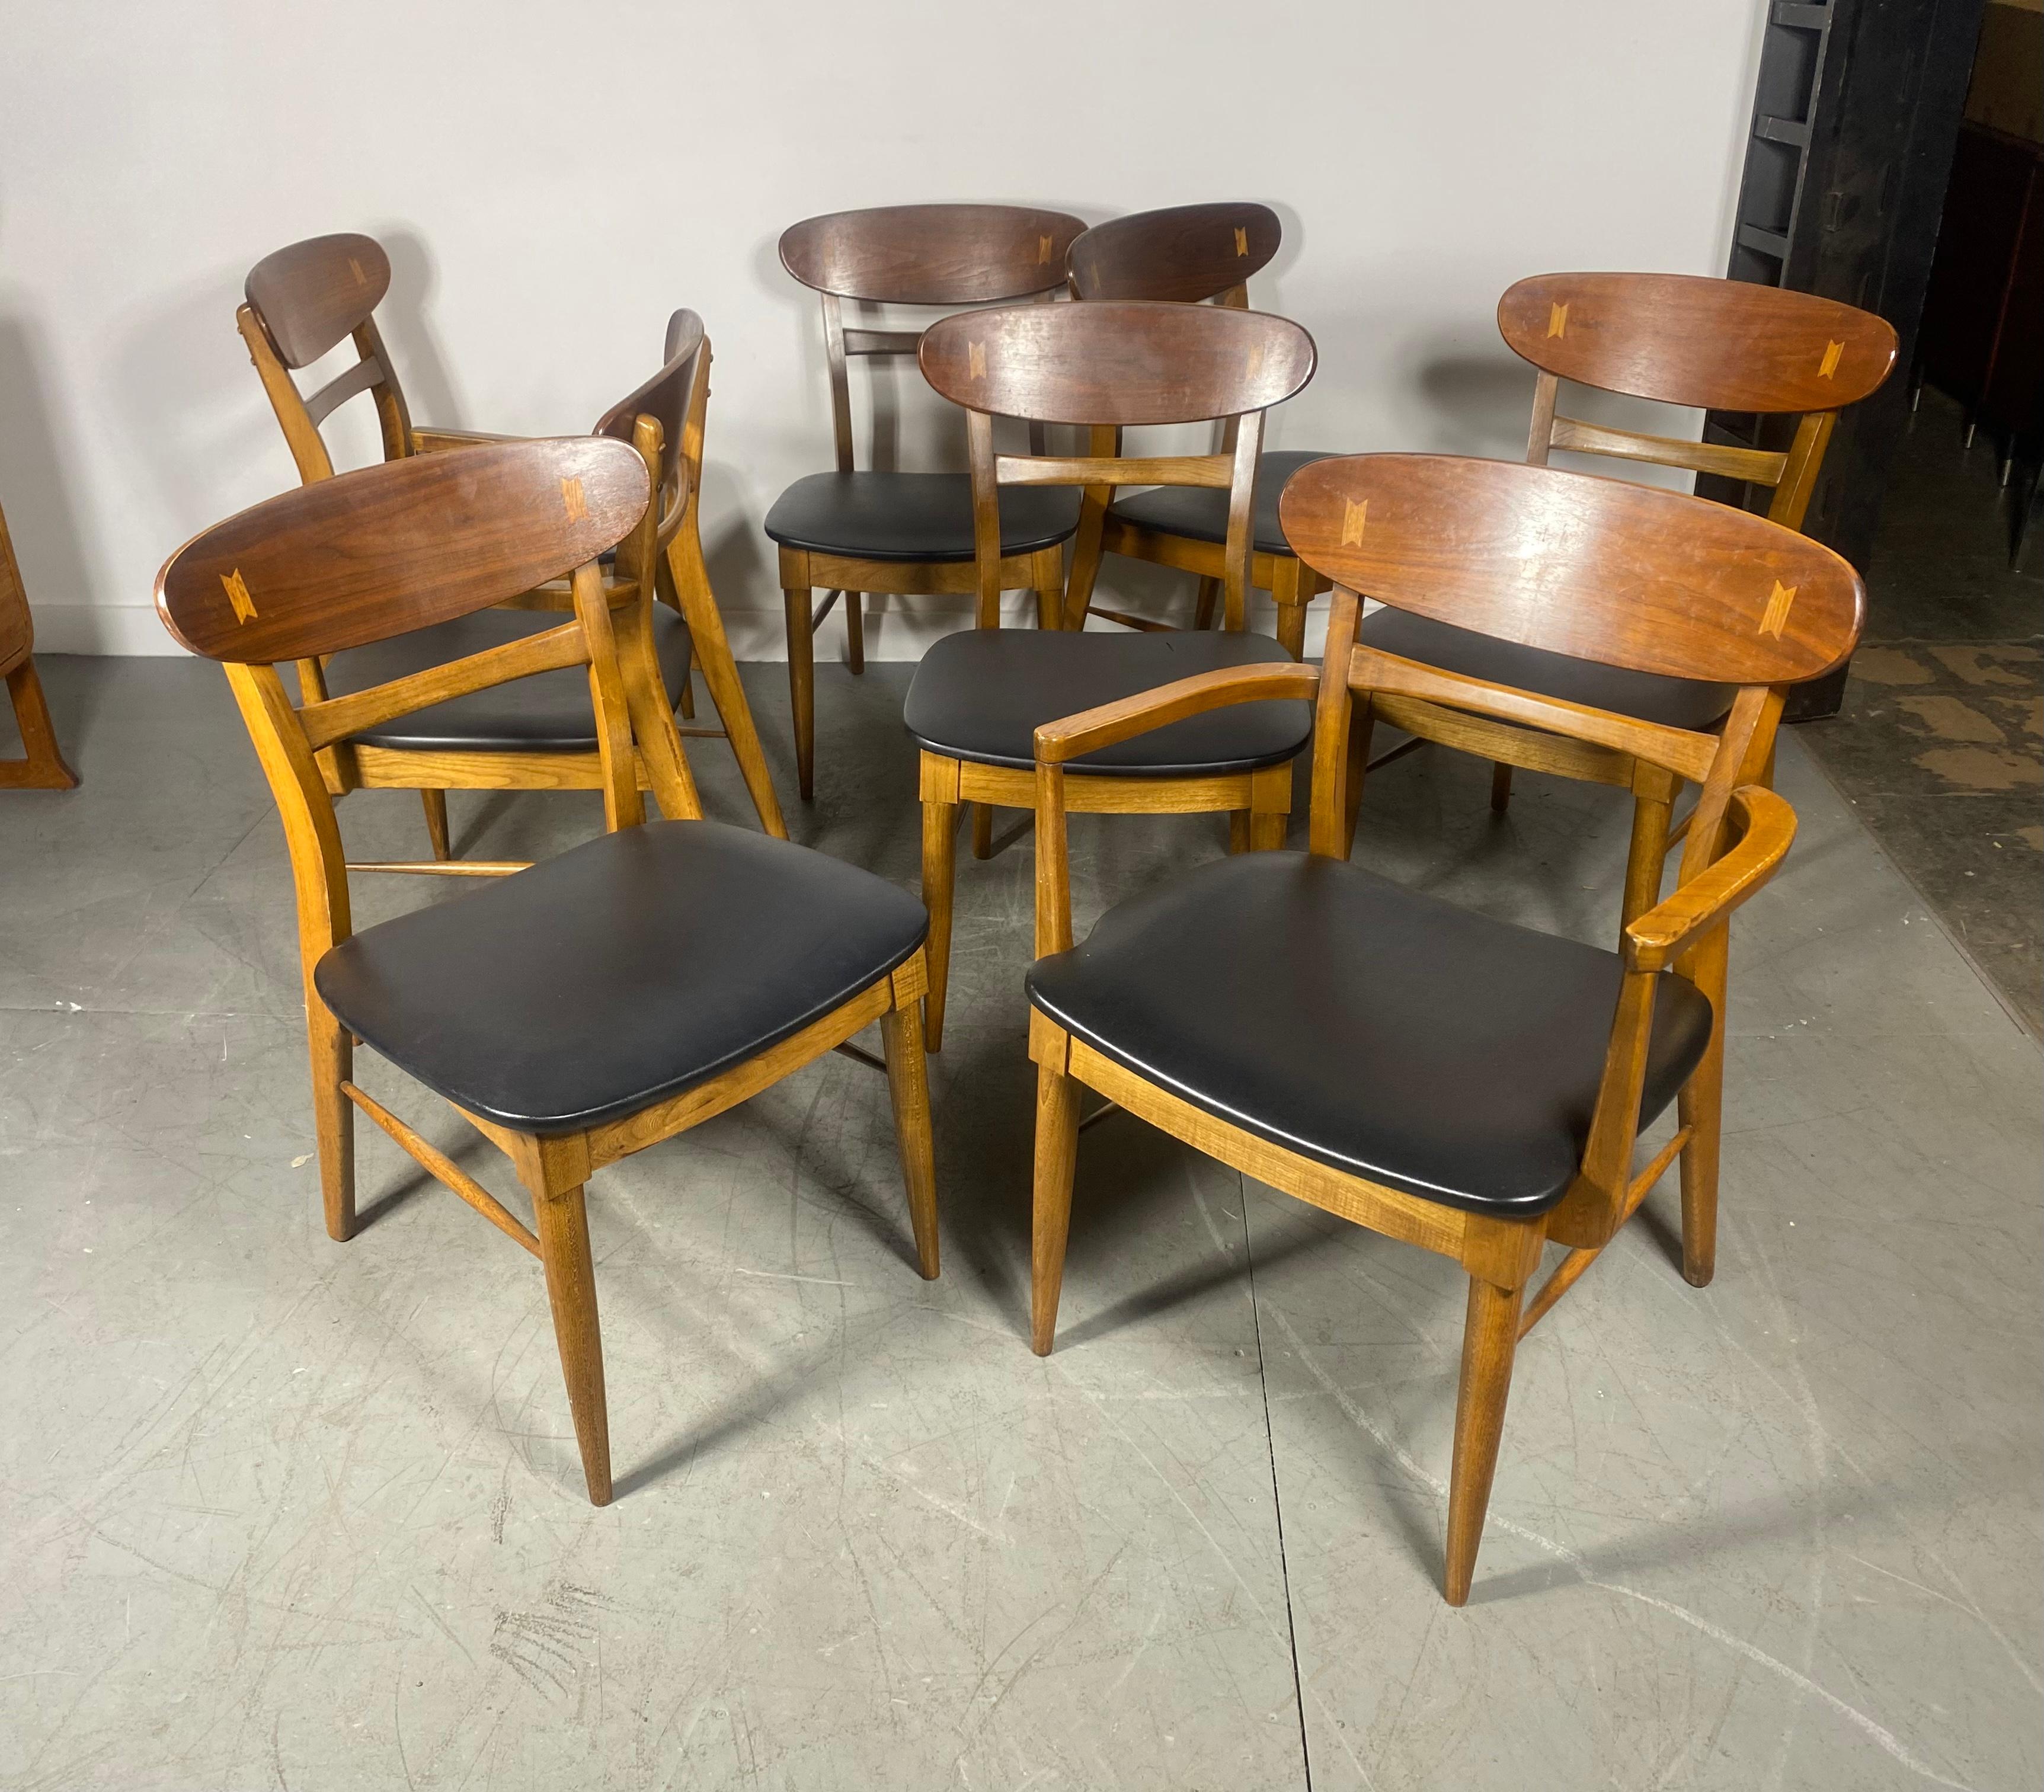 Midcentury Sculpted Back Dining Chairs Andre Bus for Lane Acclaim Set of 8 In Good Condition For Sale In Buffalo, NY